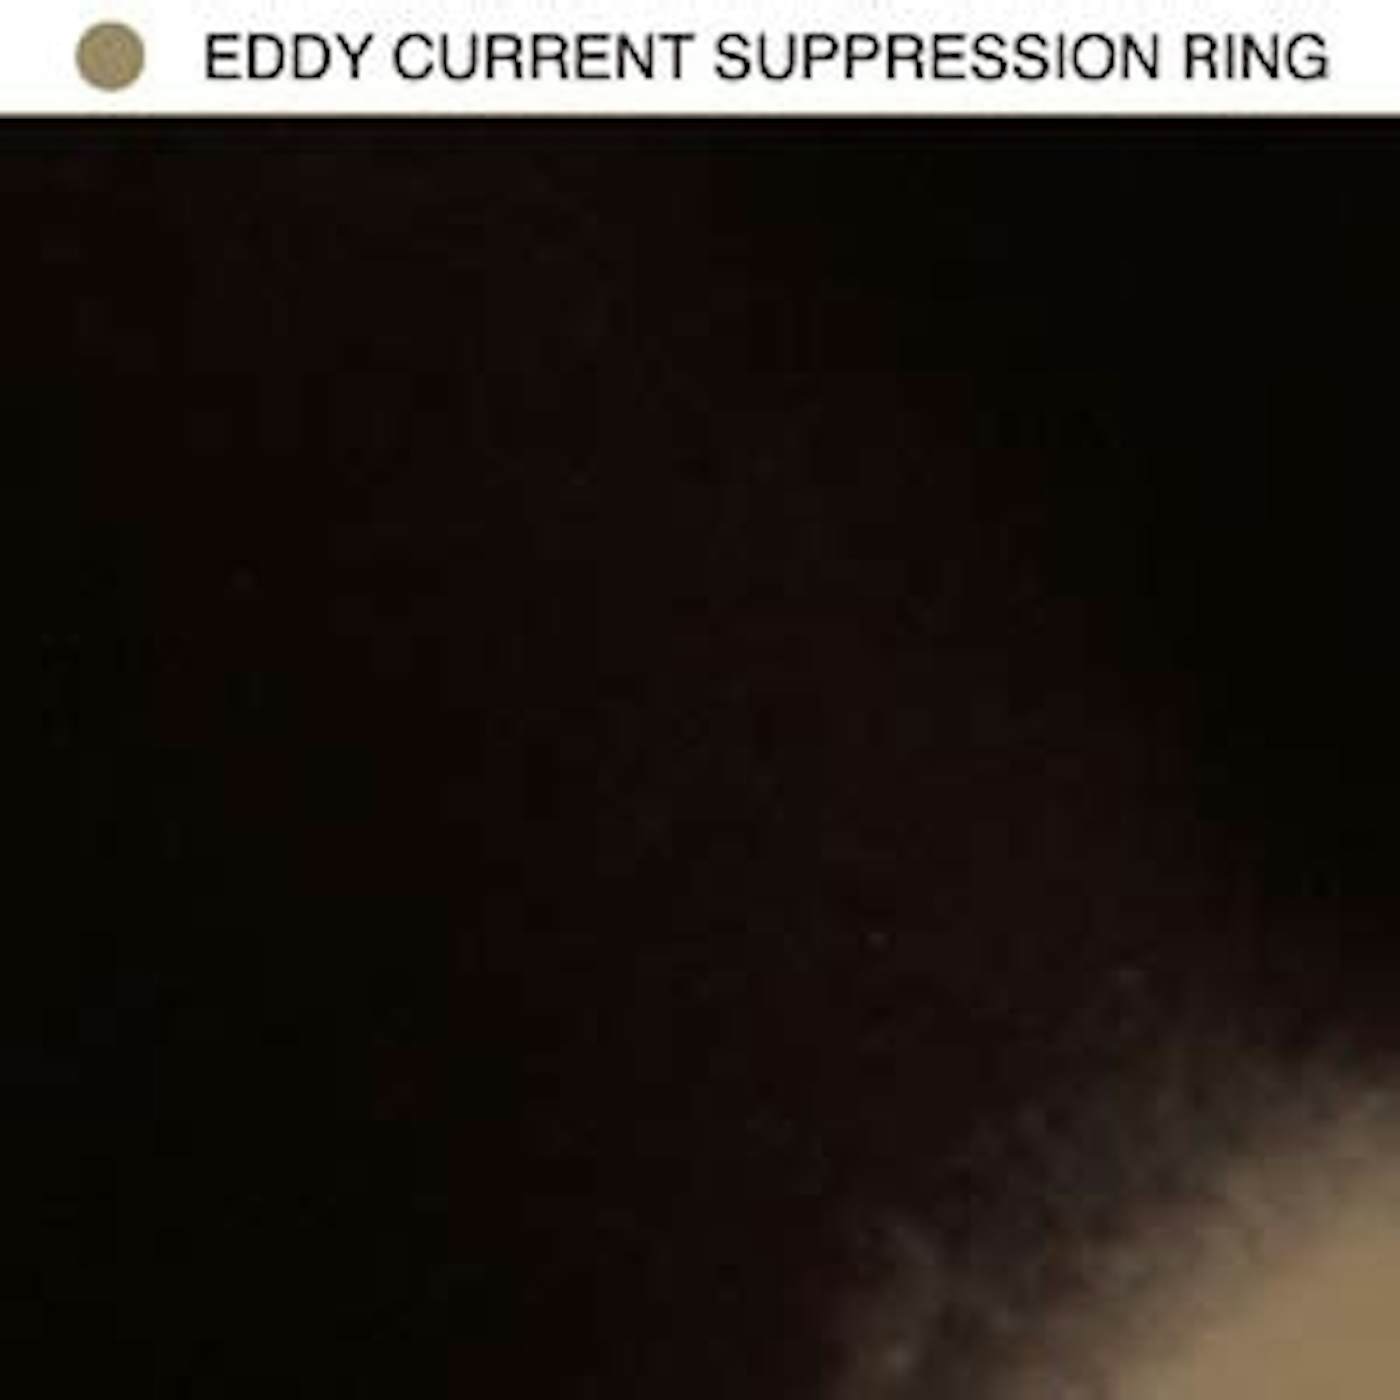 Eddy Current Suppression Ring S/T CD